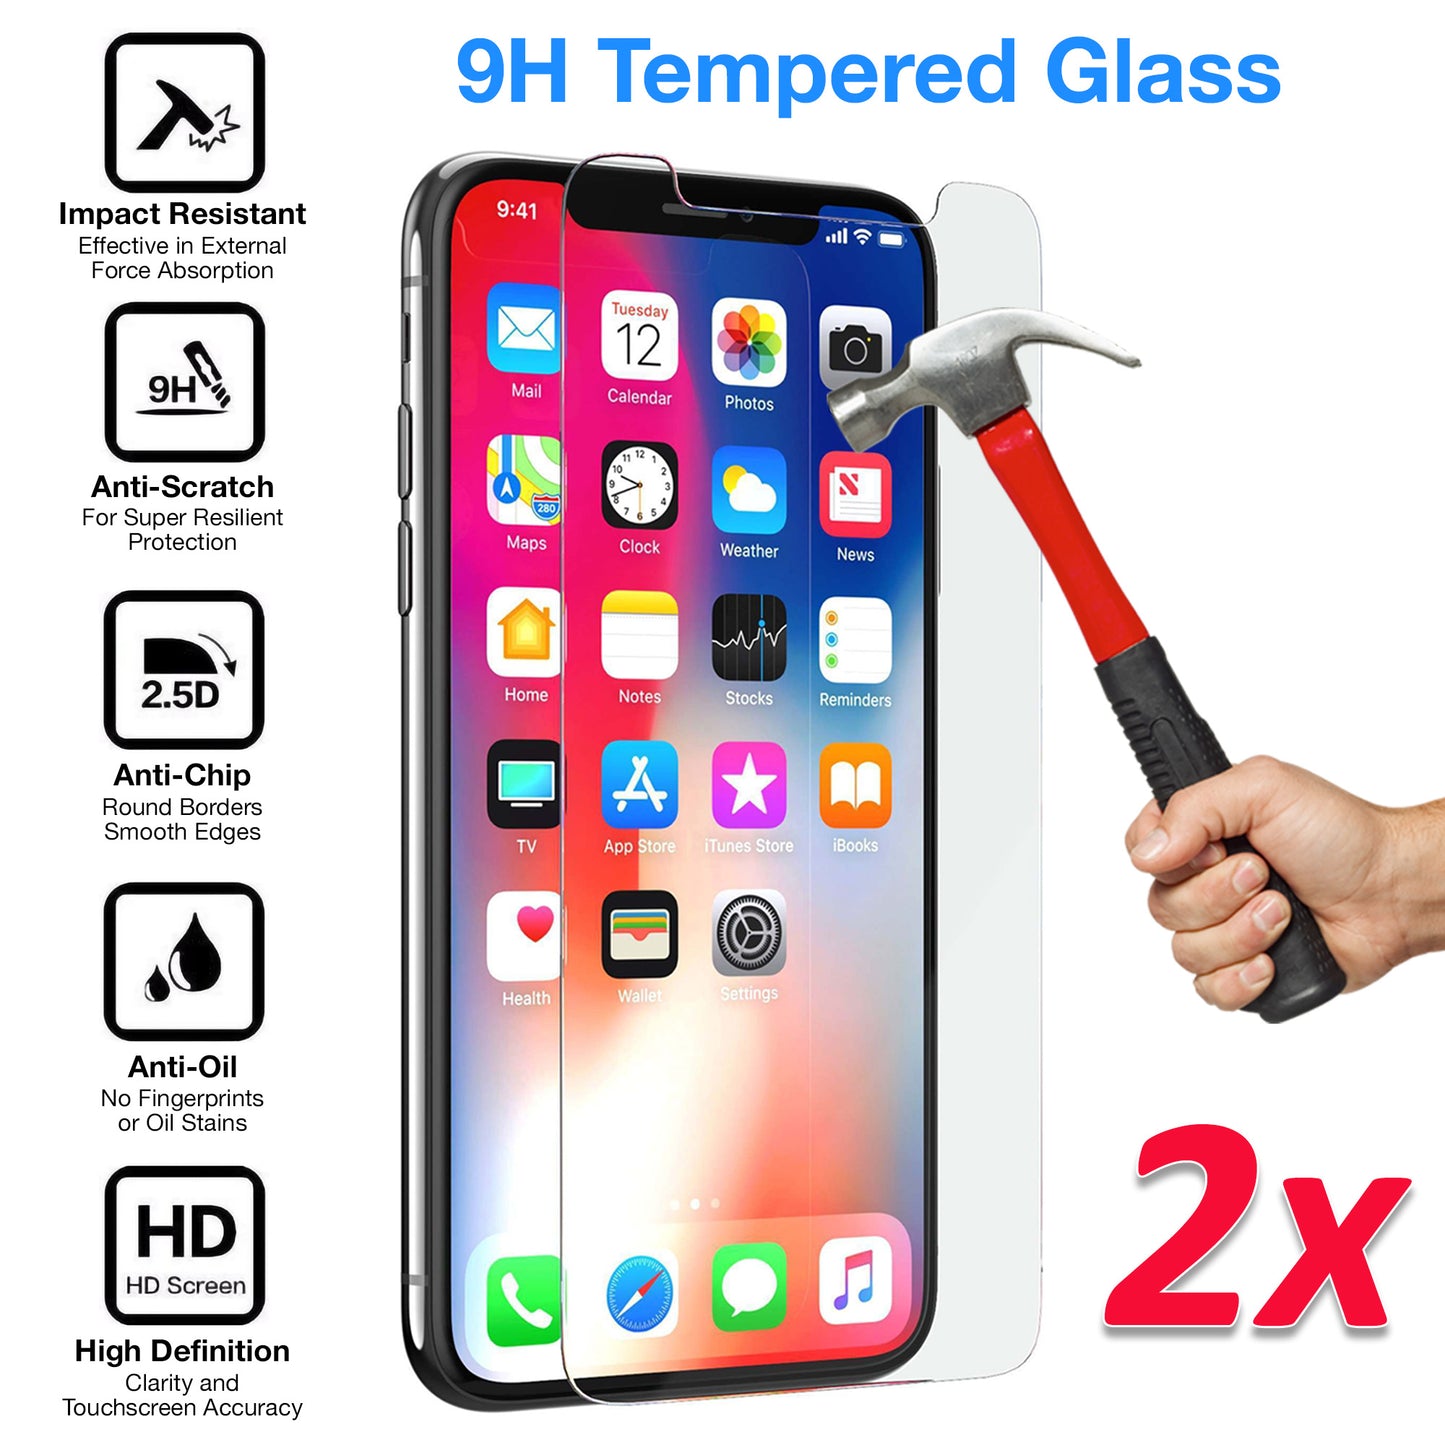 [2 Pack] MEZON Apple iPhone XR (6.1") Tempered Glass Crystal Clear Premium 9H HD Case Friendly Screen Protector (iPhone XR, 9H)